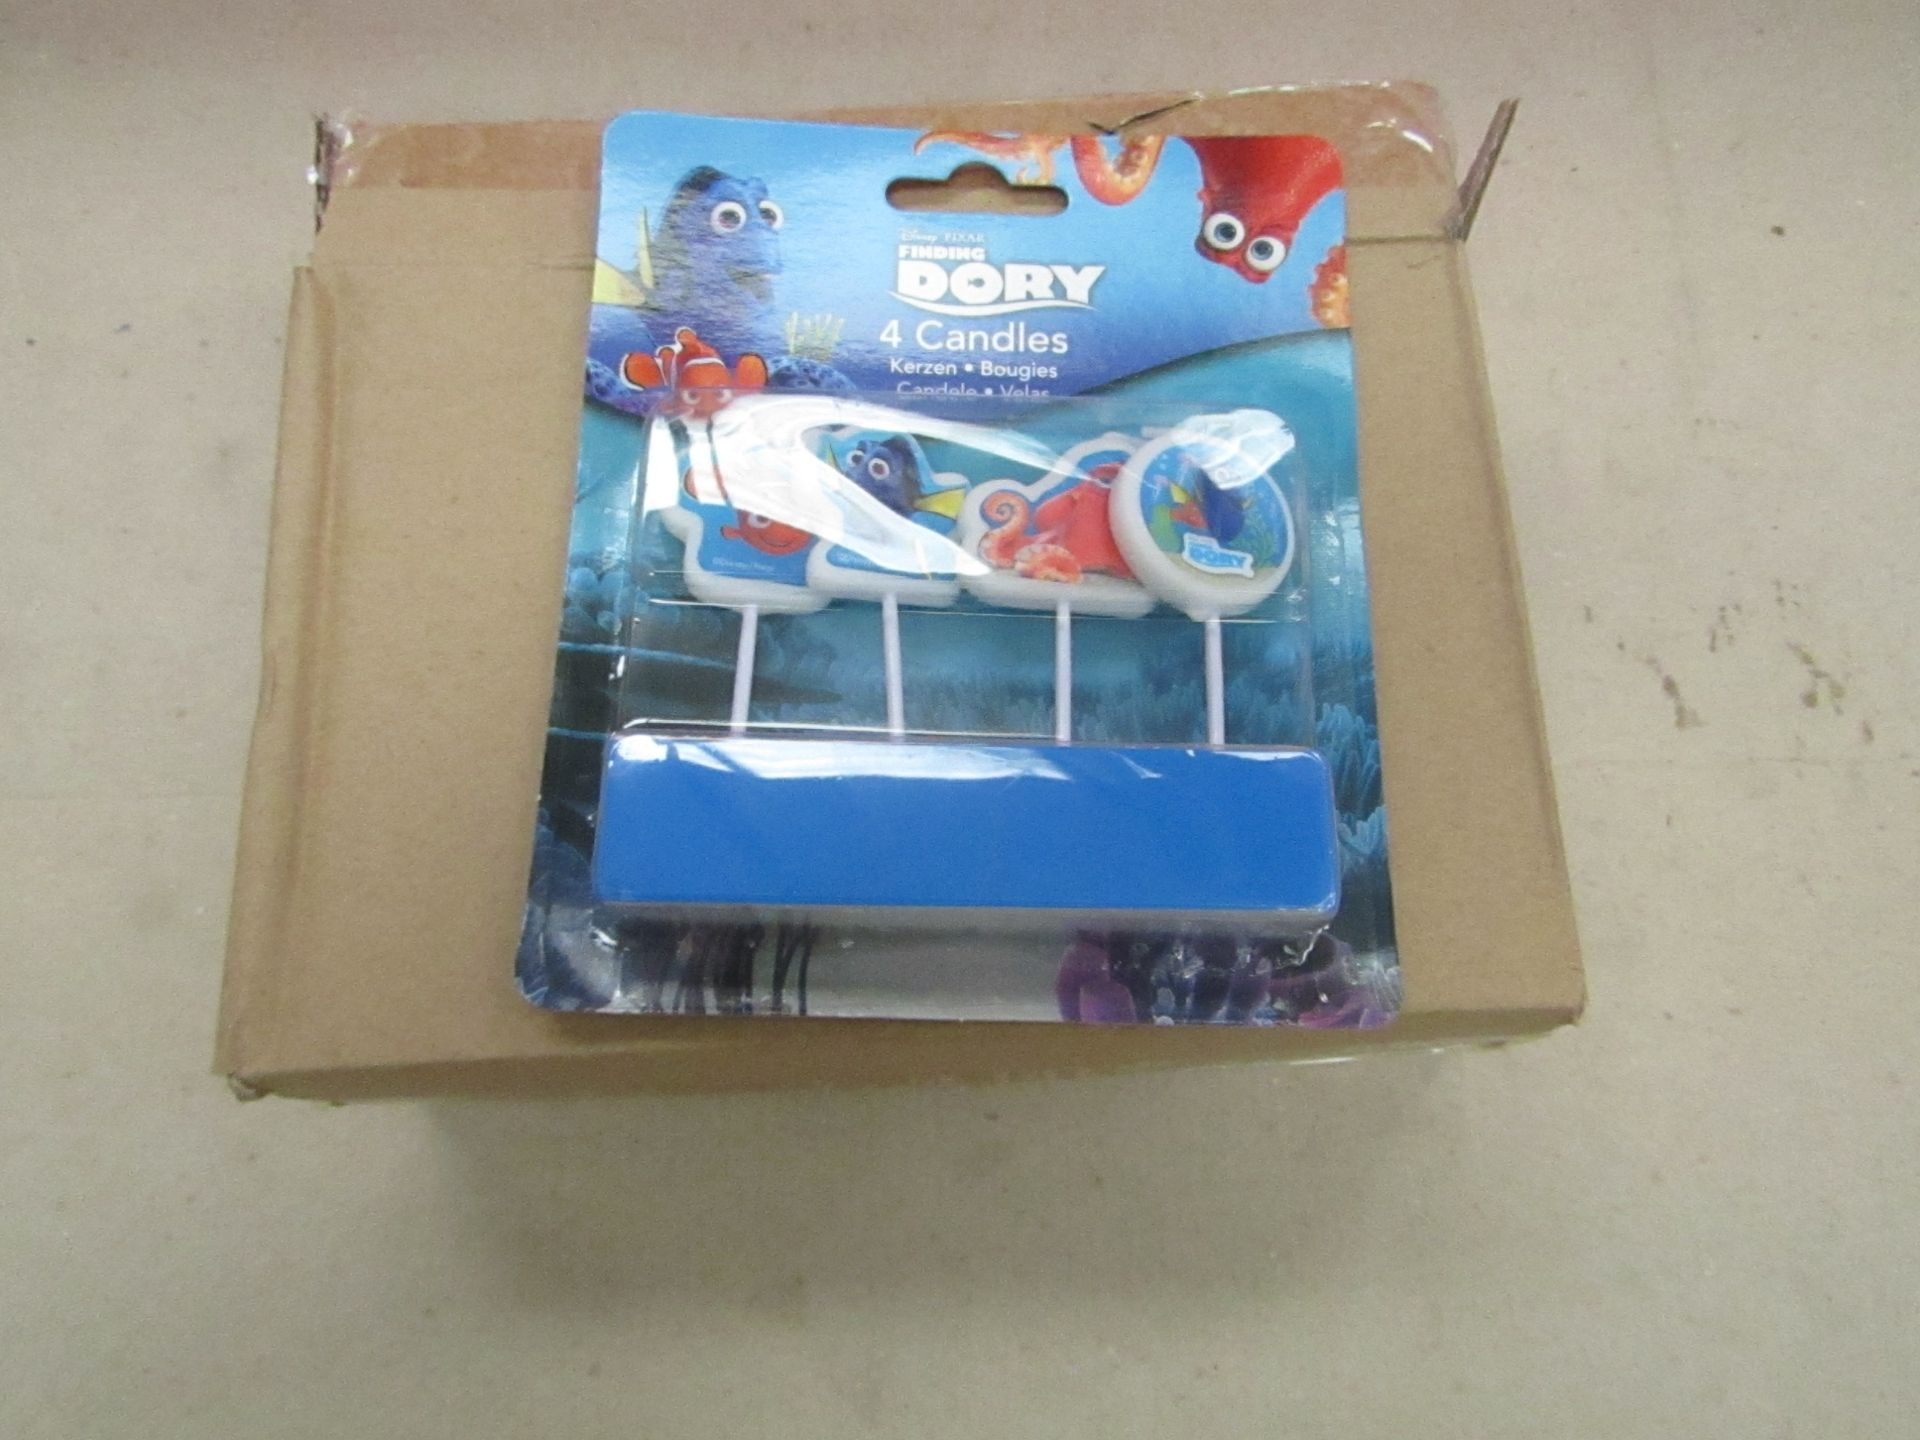 20x Disney Pixar - Finding Dory Candles Set ( 4 Candles Per Pack ) - New & Packaged.